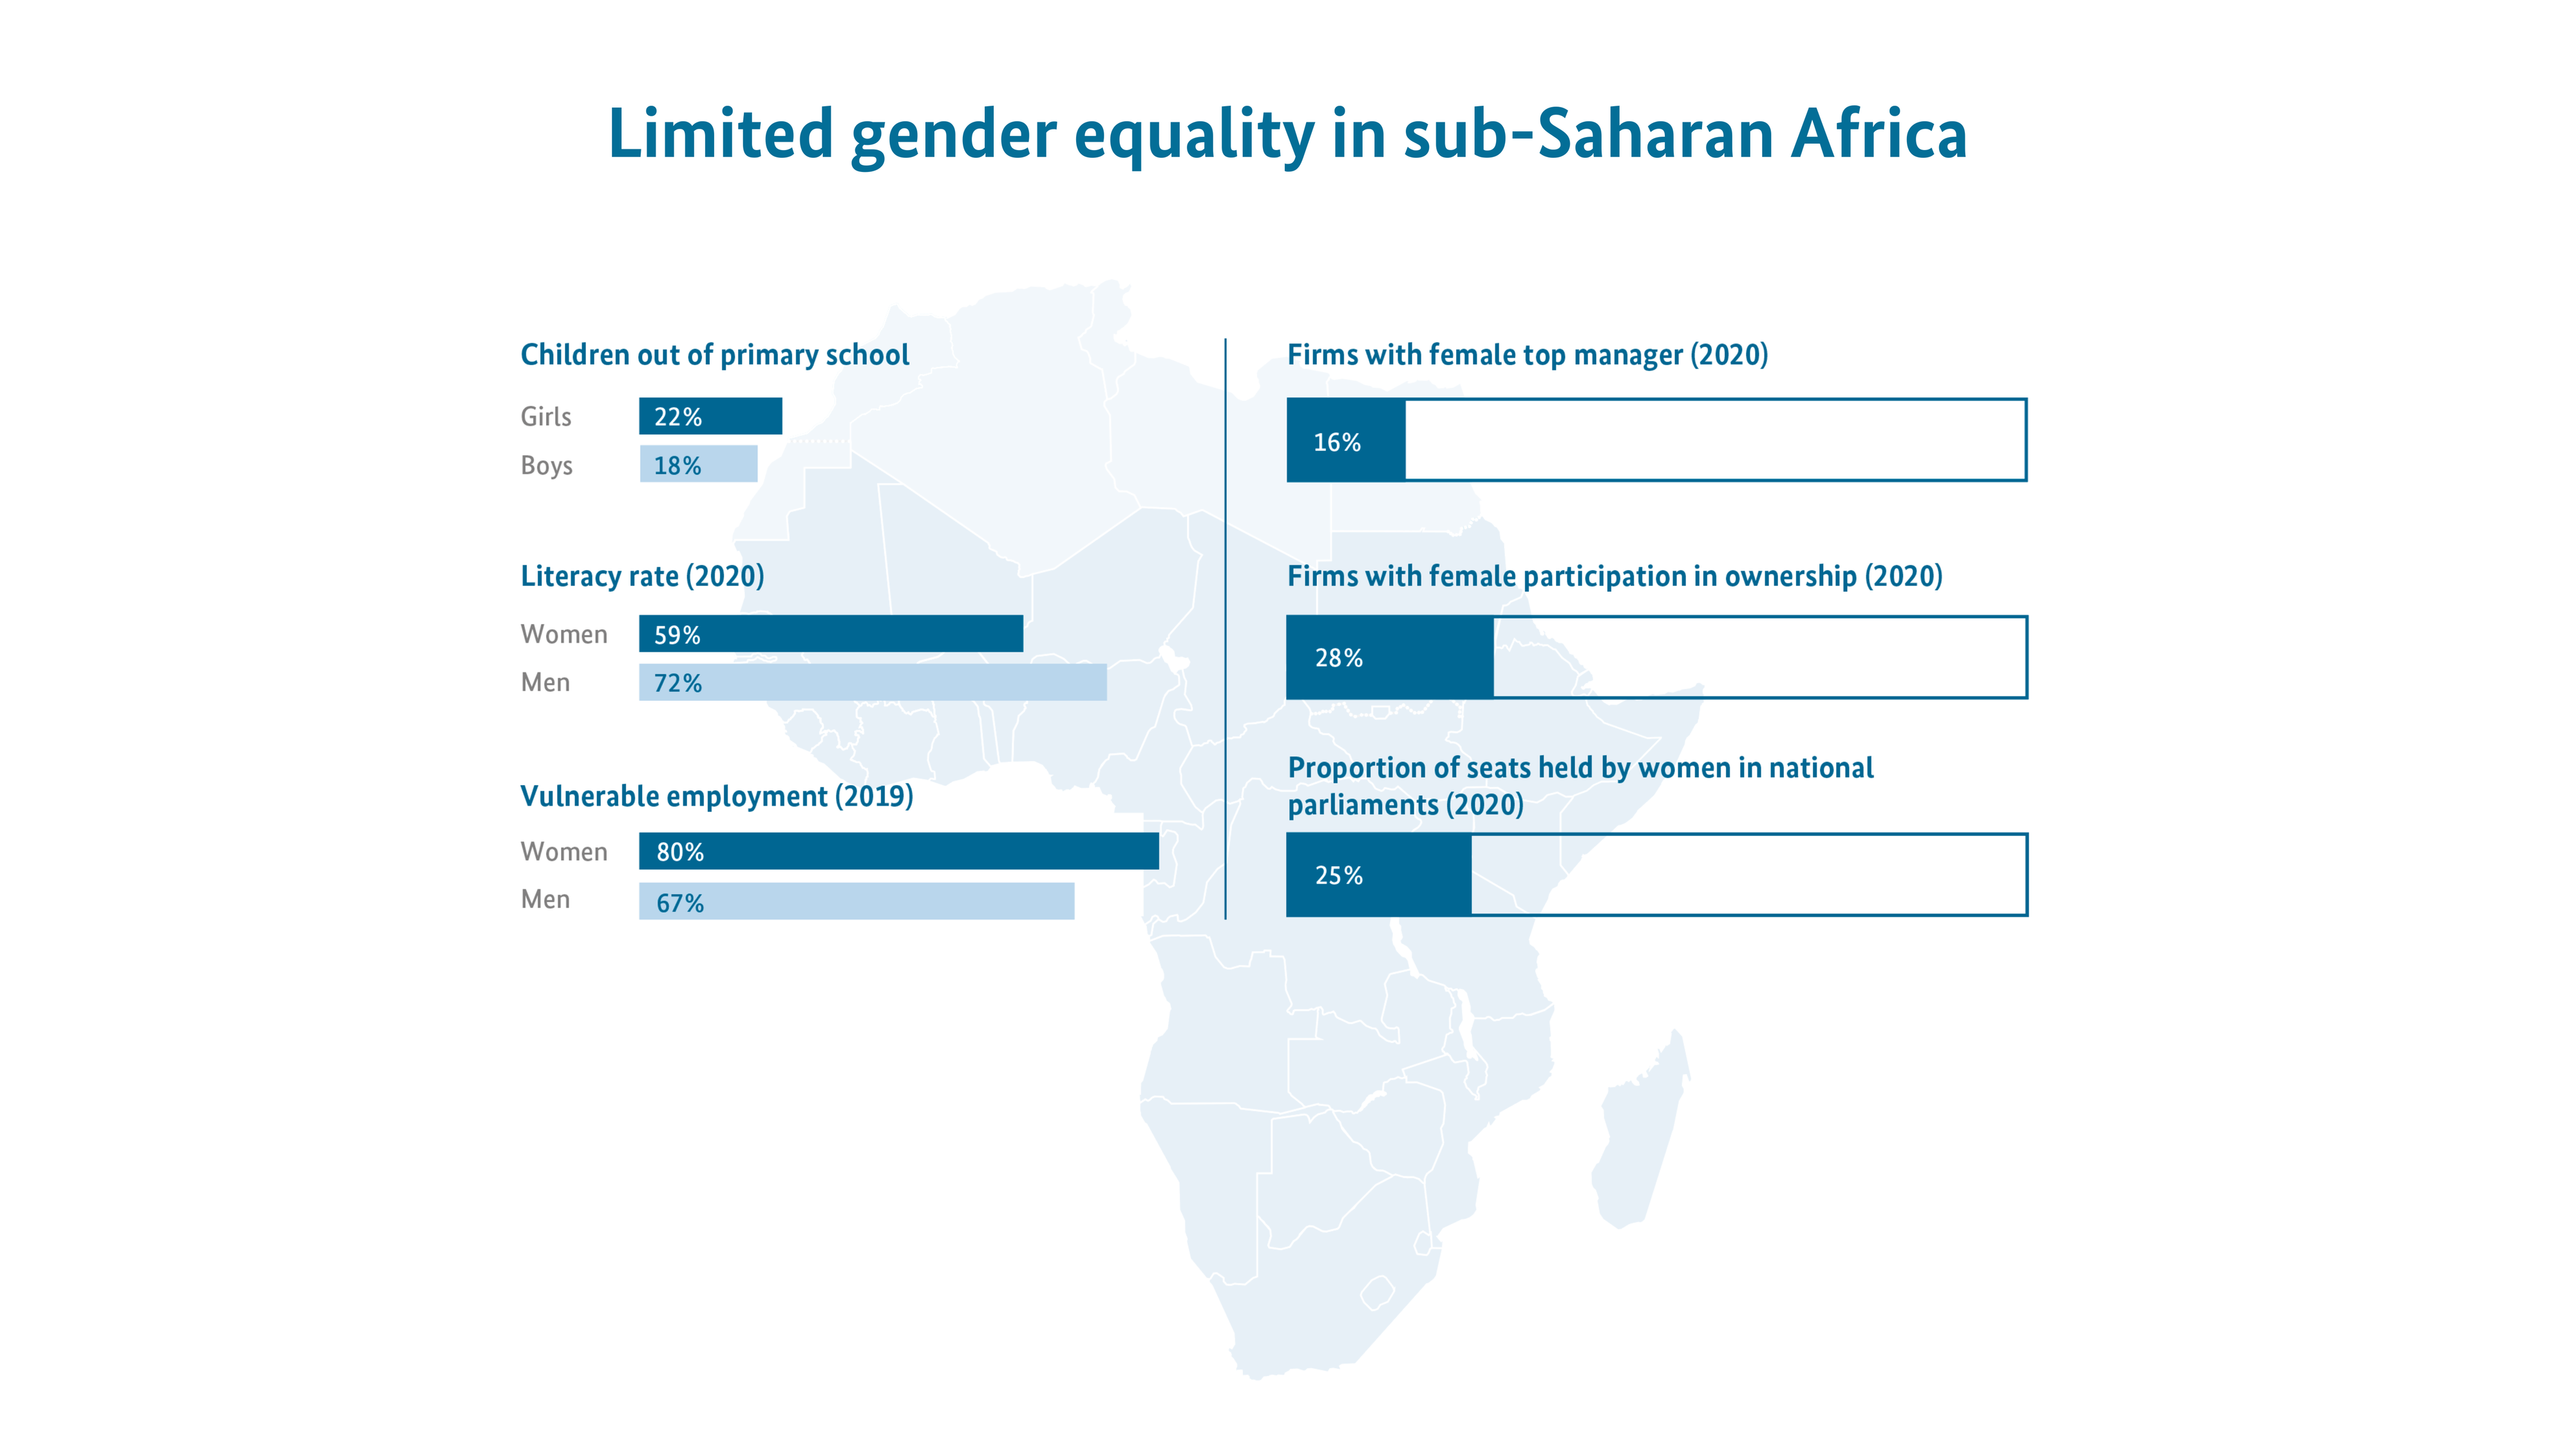 Limited gender equality in sub-Saharan Africa